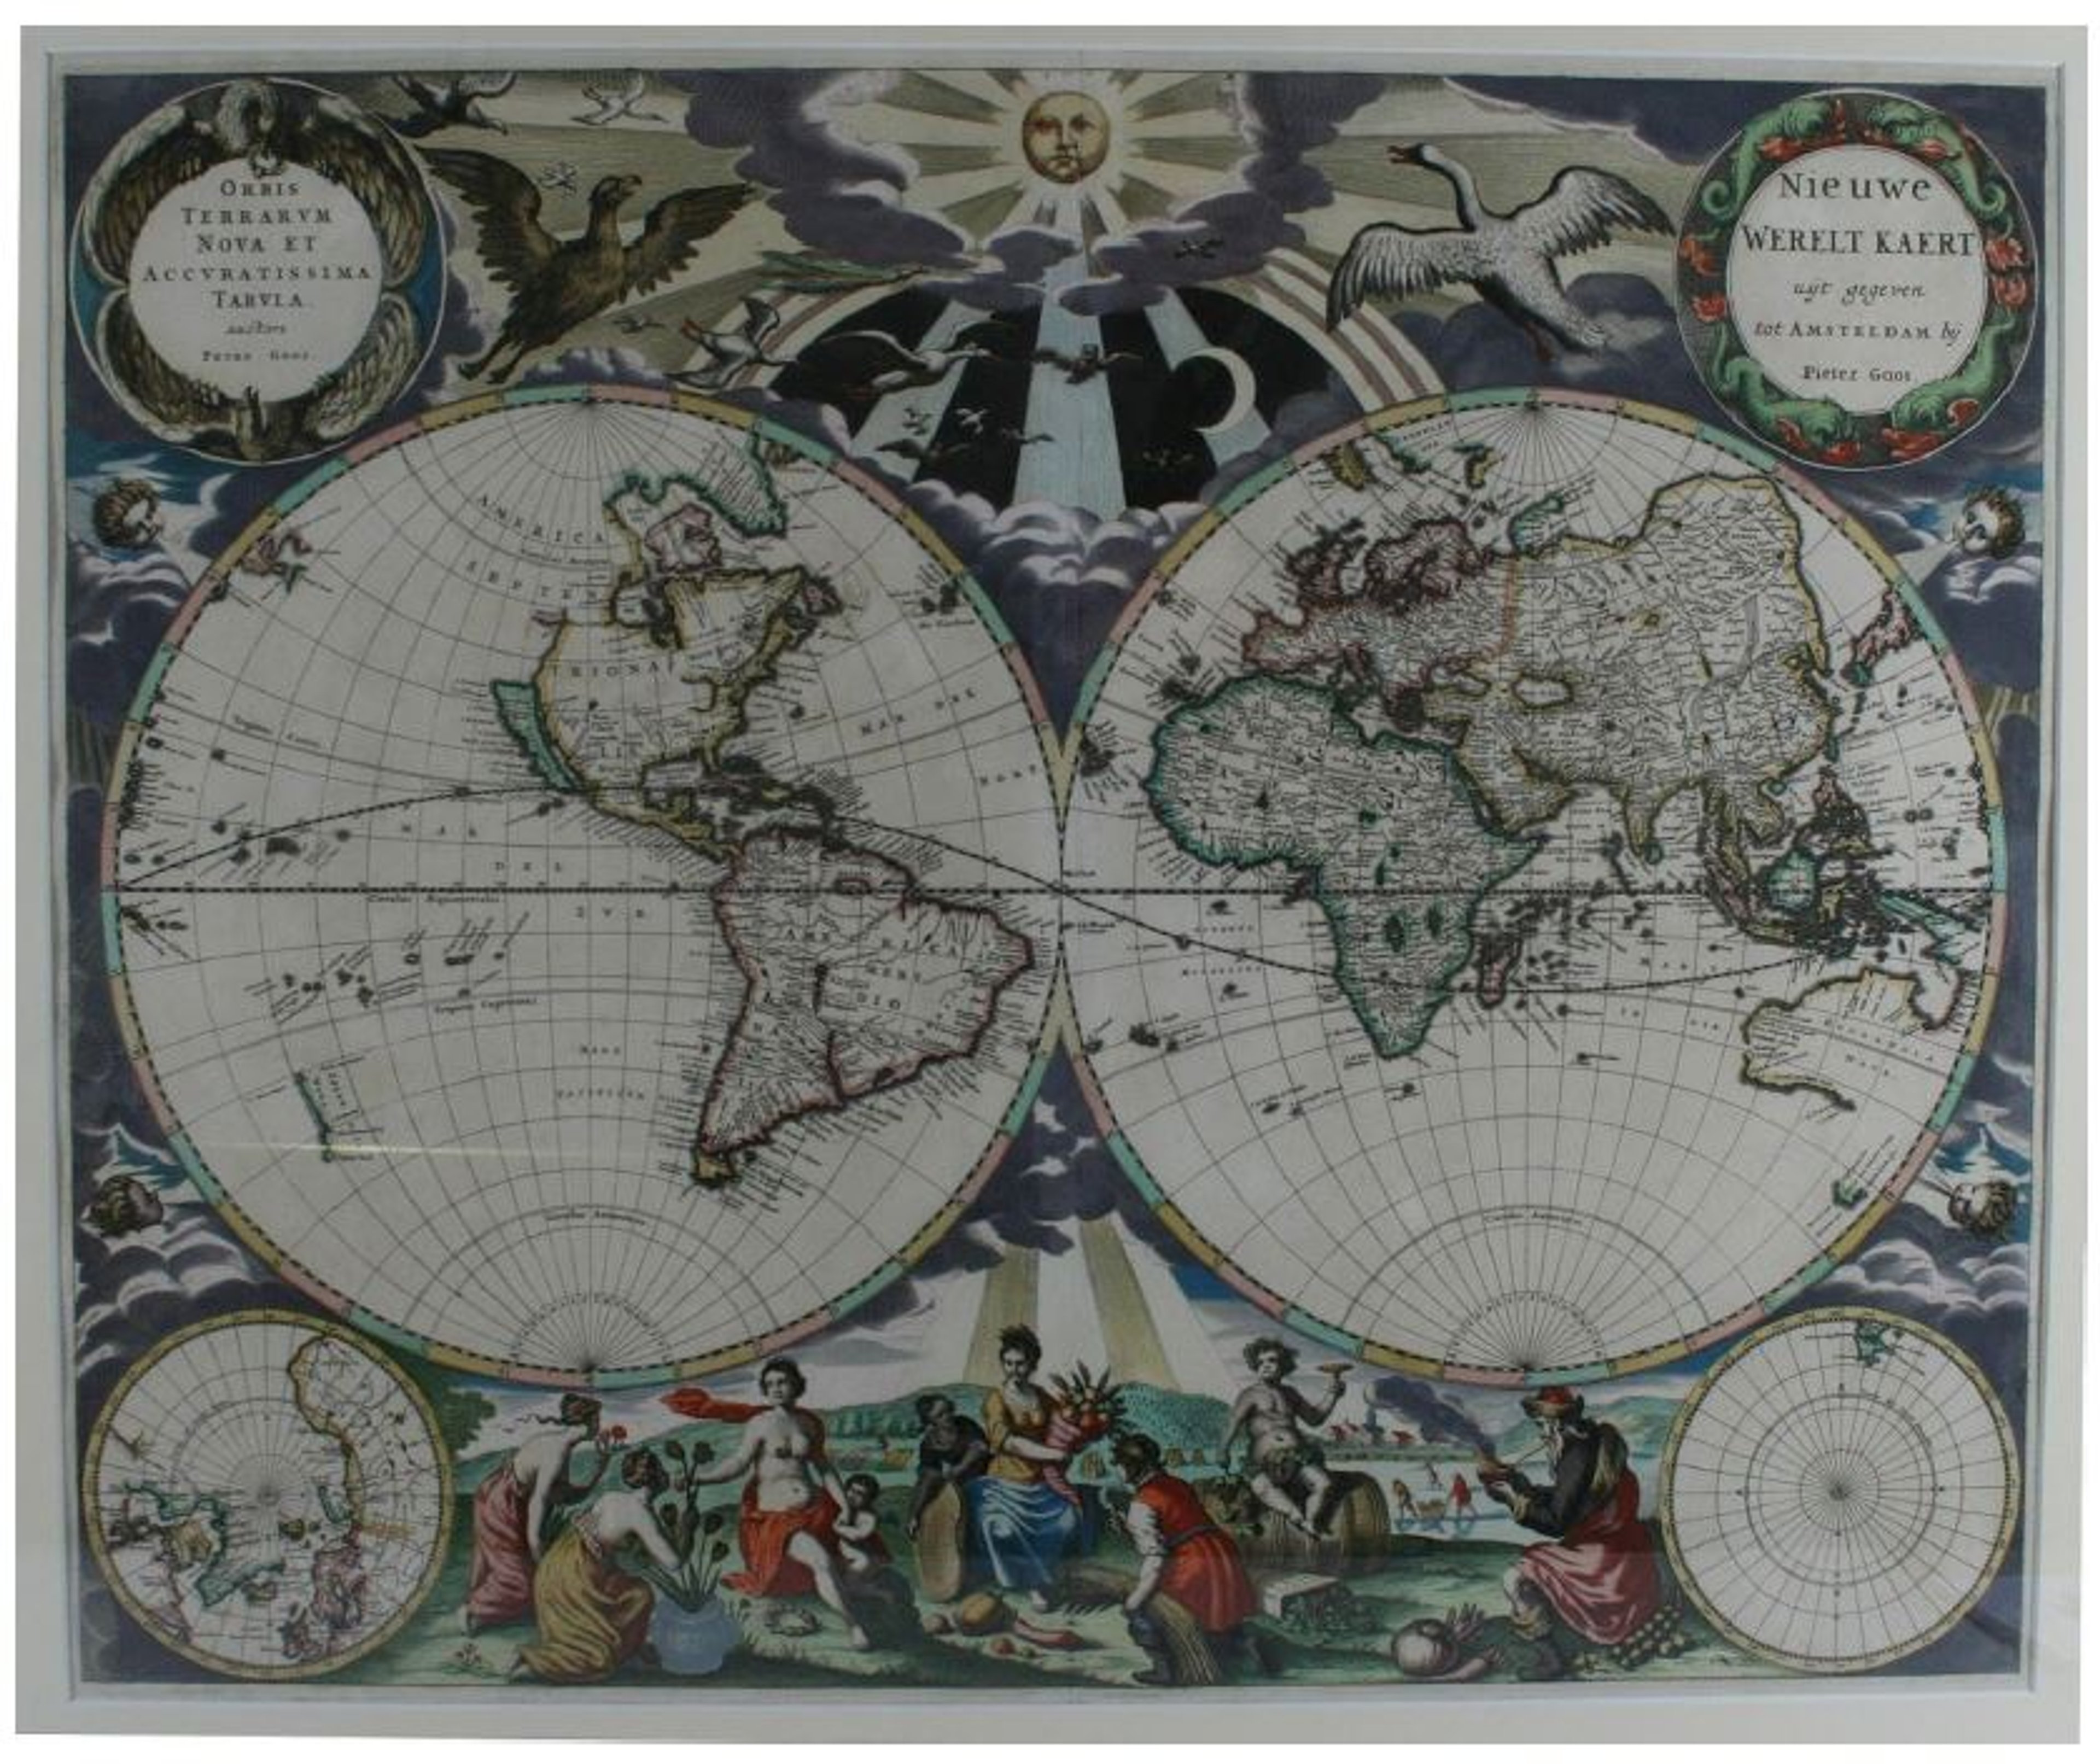 Preview of Abraham Goos' double hemisphere world map: Orbis Terrarum Nova et Accuratissima Tabula. Adorned with delicate illustrations and cartouche around the spheres.